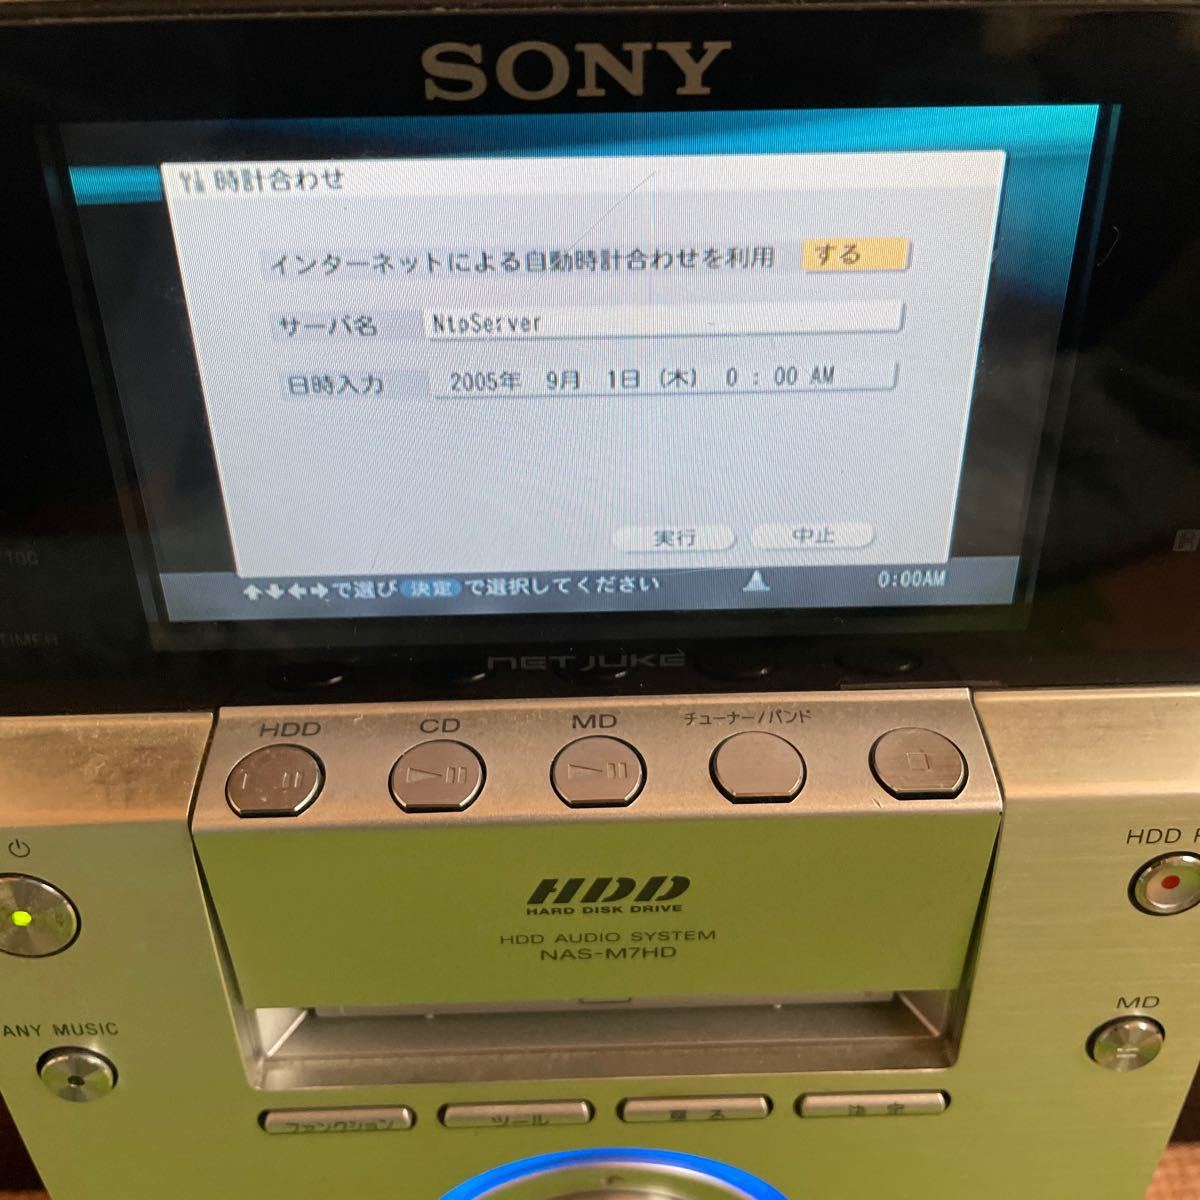 SONY HDD NETWORK AUDIO SYSTEM system player 